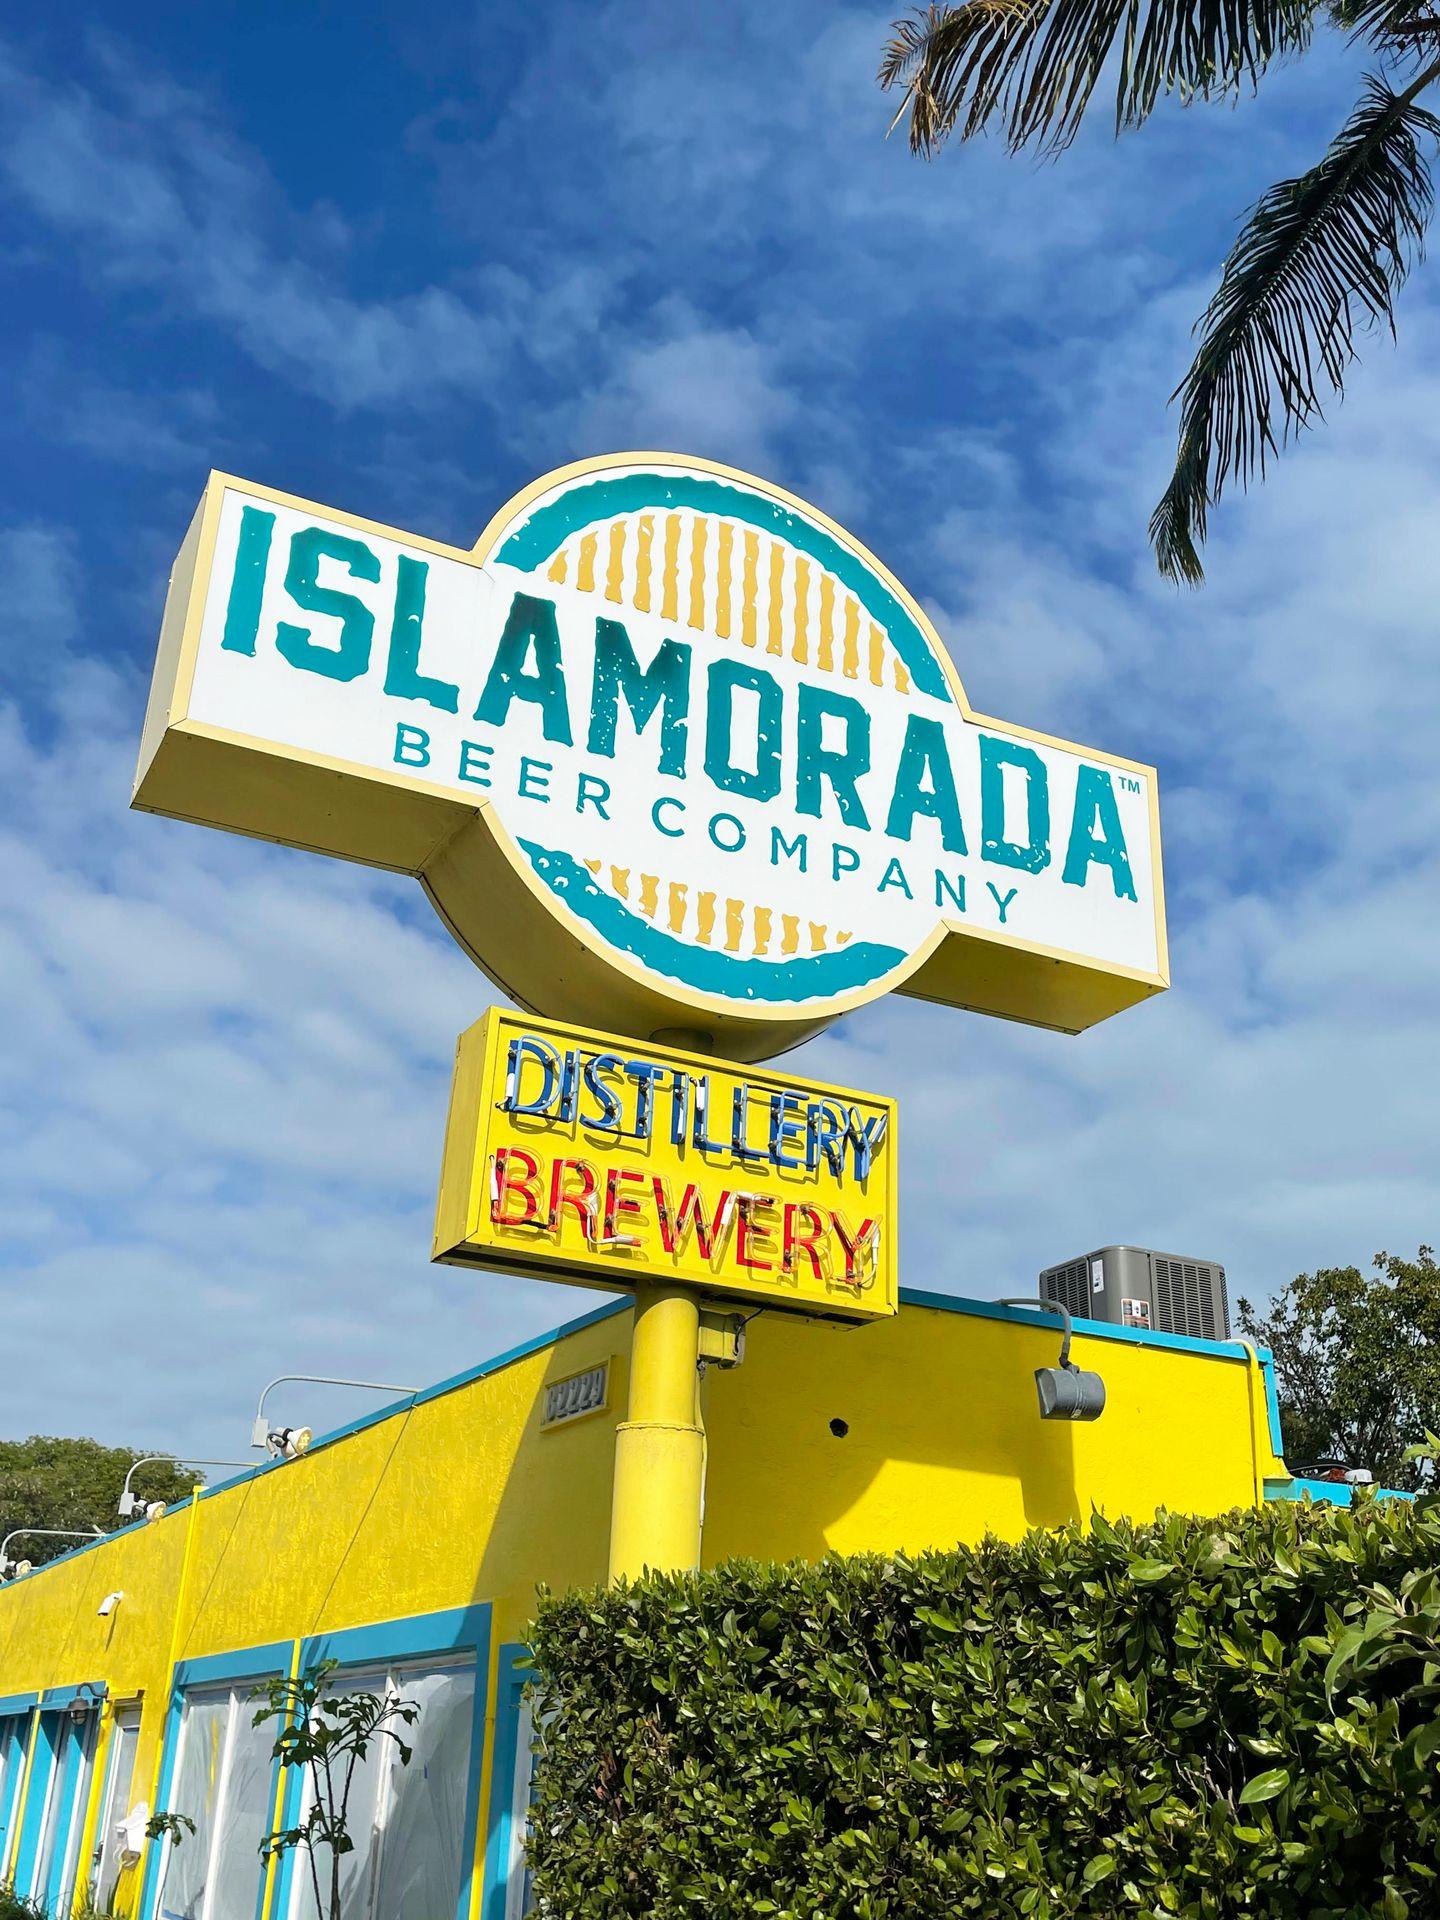 A large yellow and blue Islamorada Brewery and Distillery sign